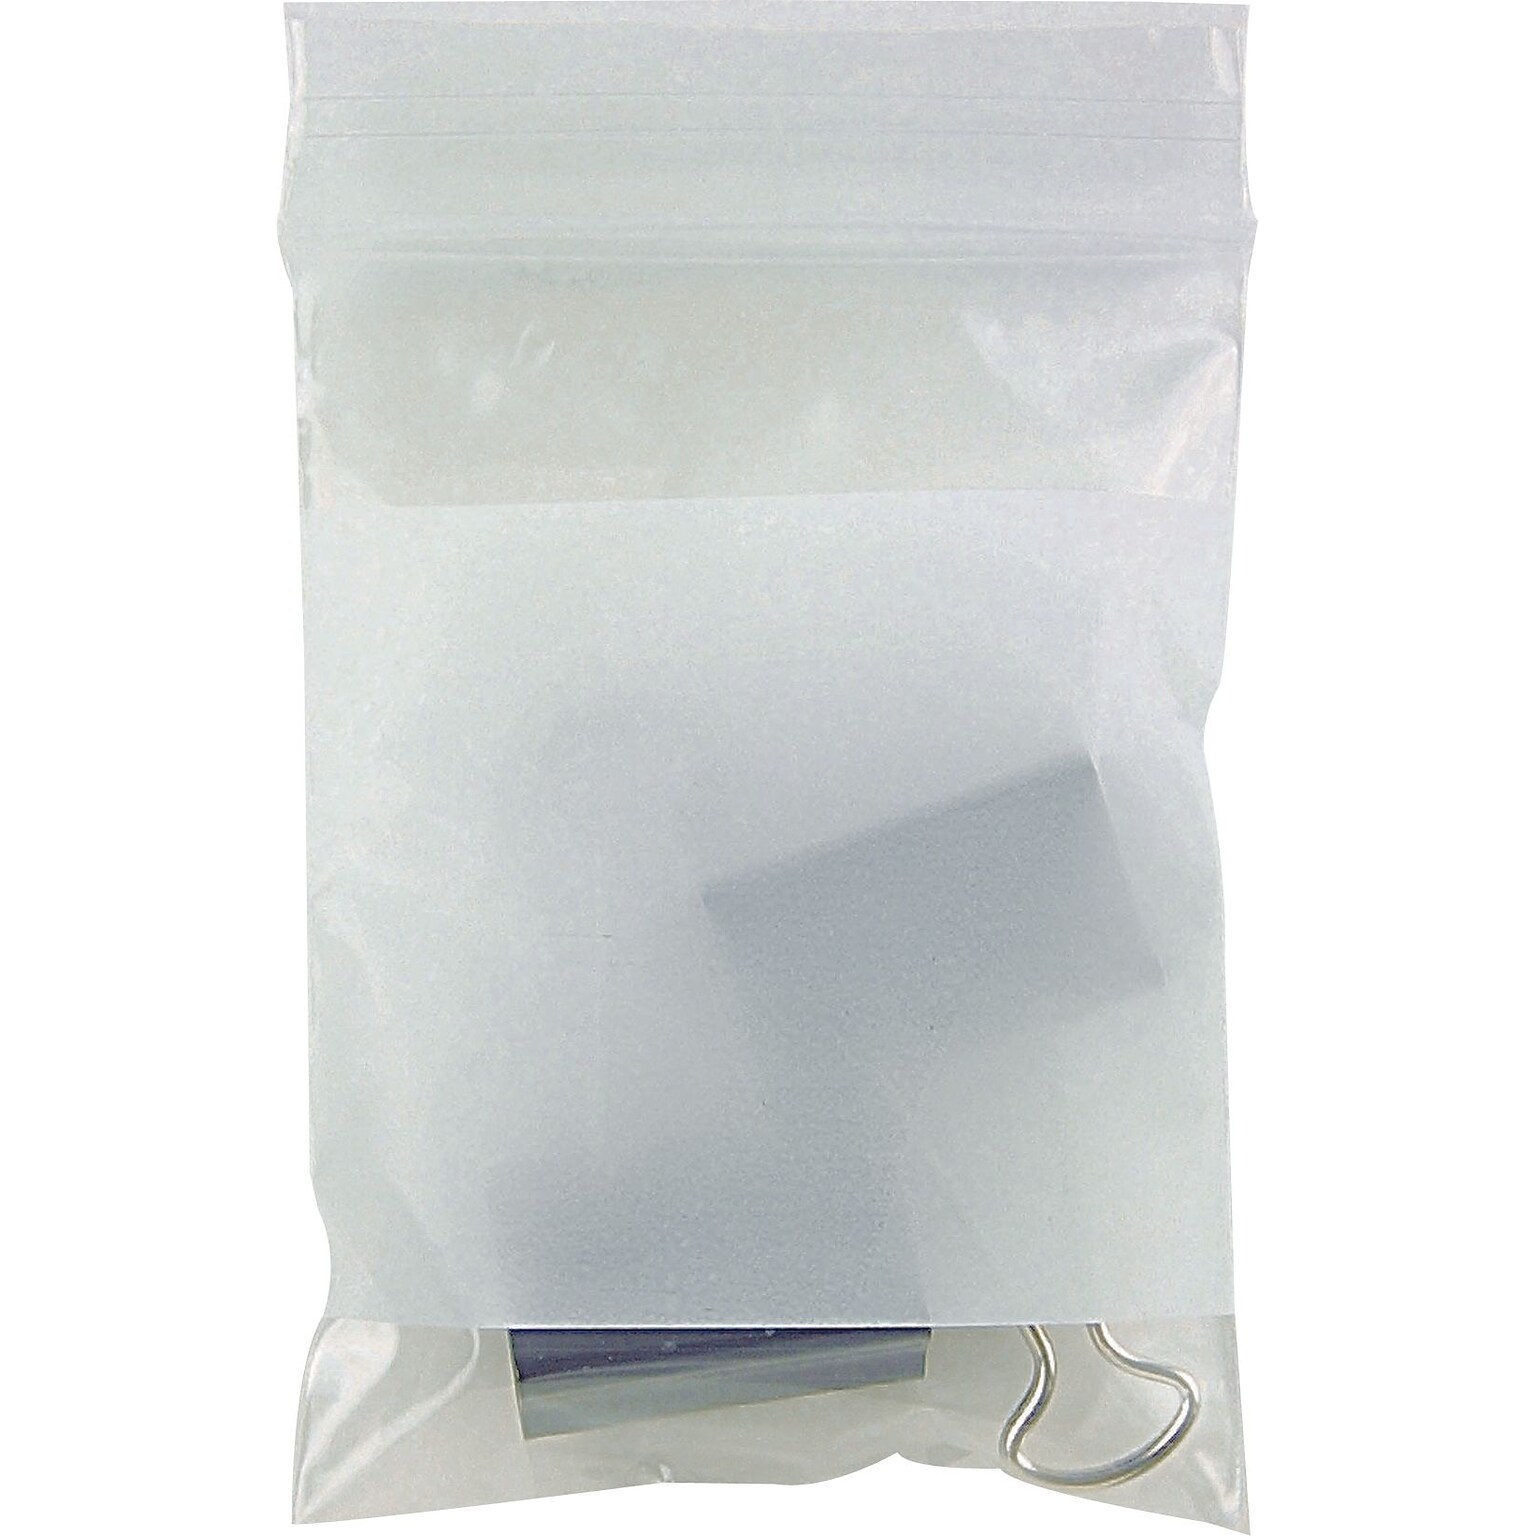 3 x 4 Reclosable Poly Bags, 4 Mil, Clear, 1000/Carton (PB3984)